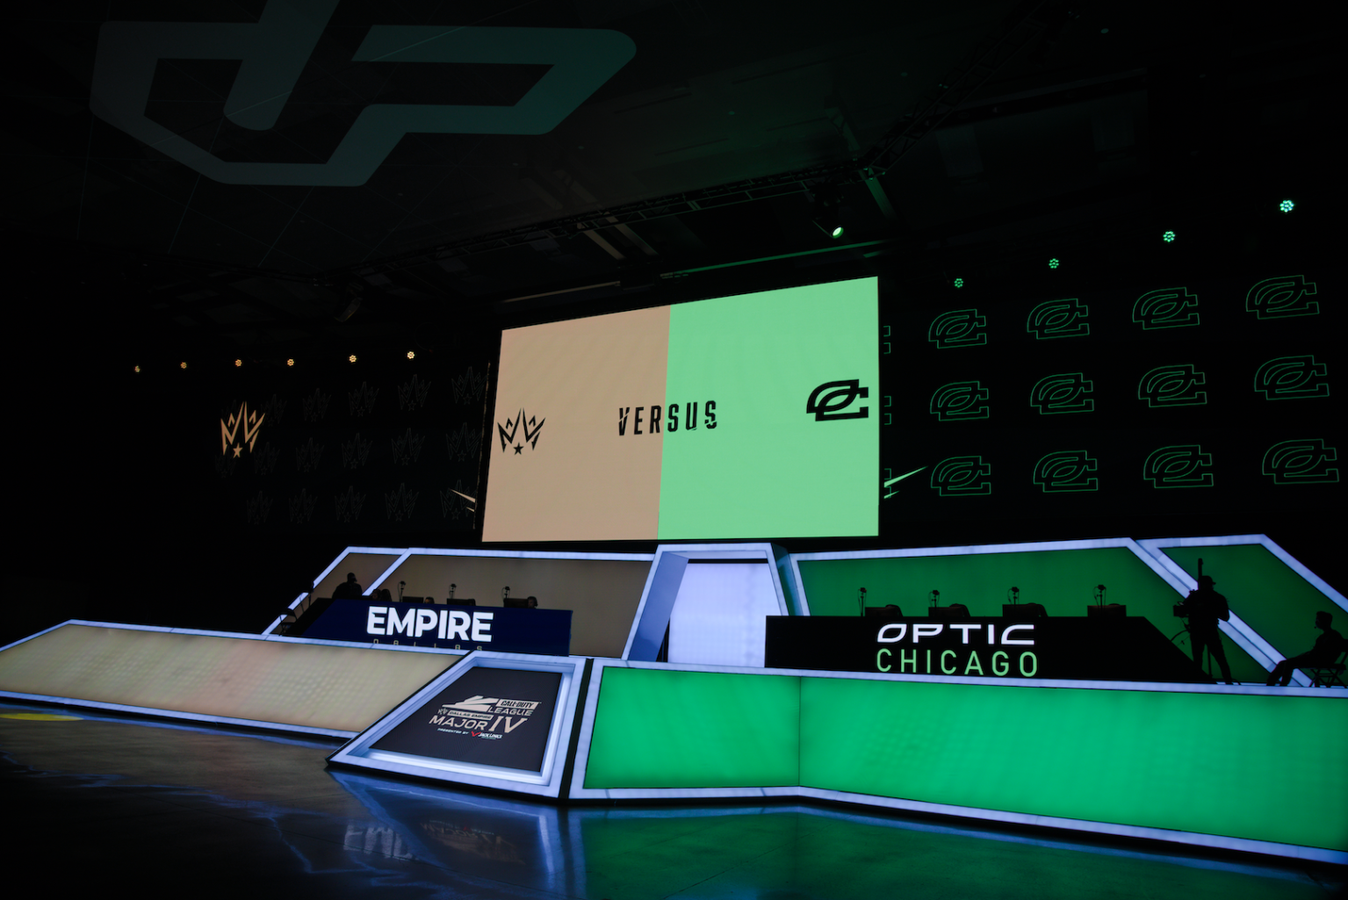 Call of Duty League Stage With Dallas Empire and OpTic Chicago Logos On Stage And Background Screen